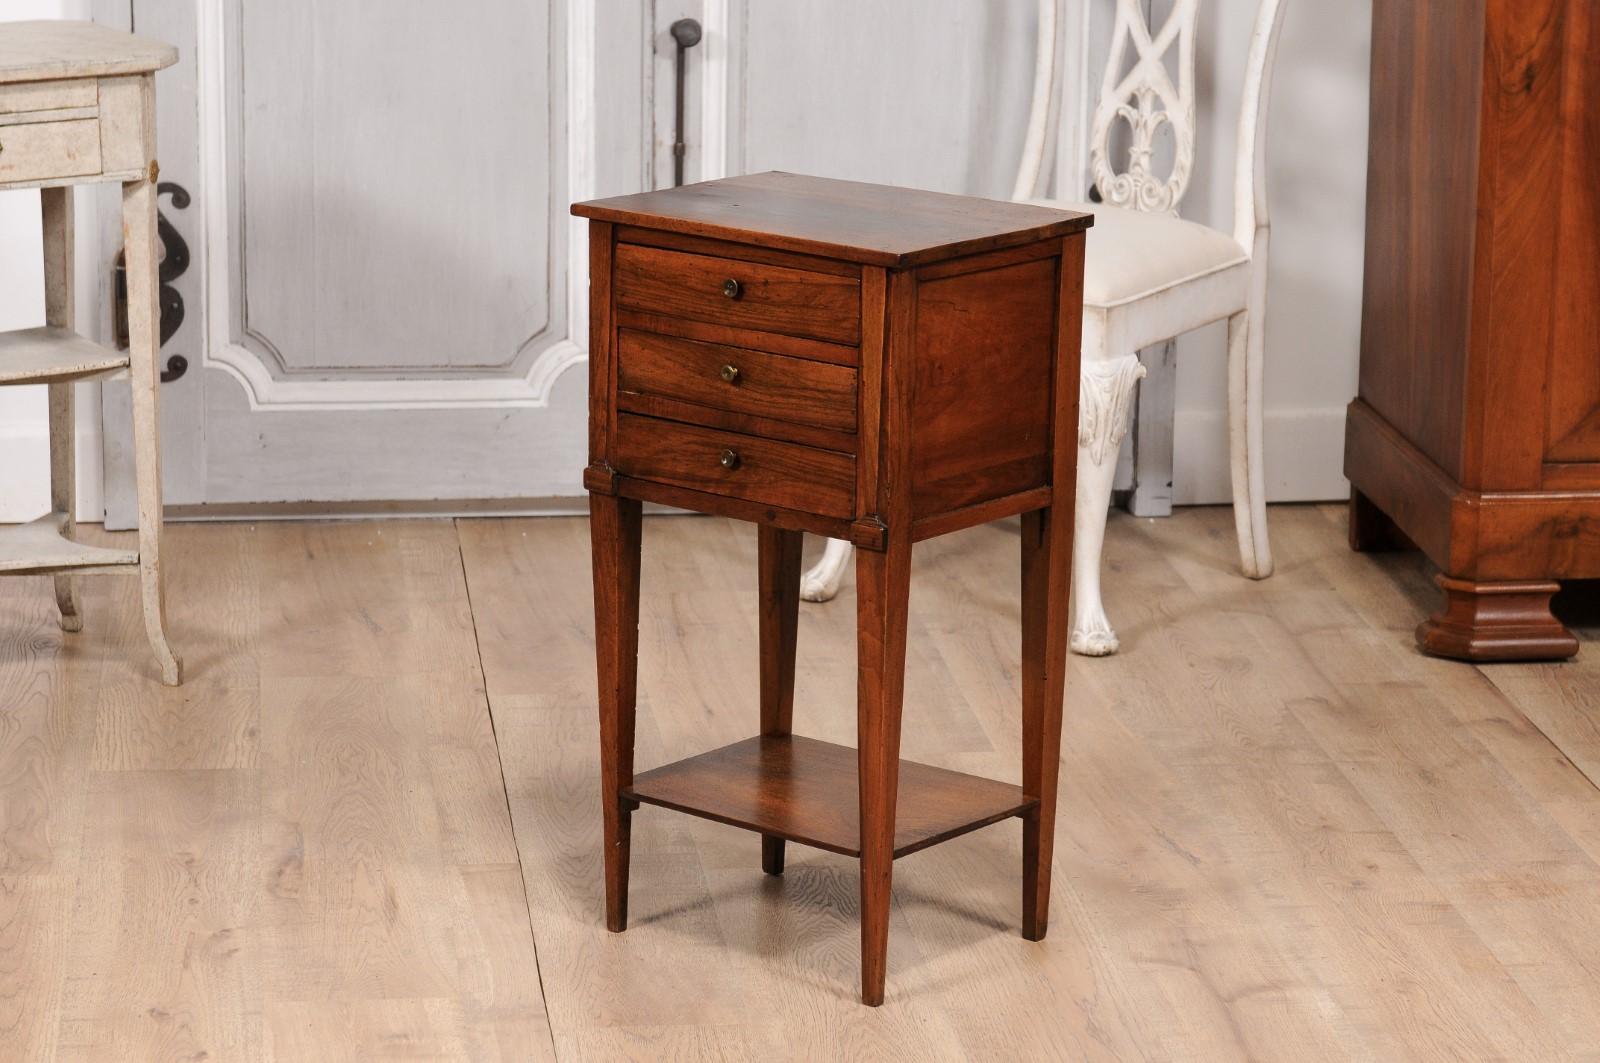 18th Century Italian Walnut Bedside Table with Three Drawers and Tapering Legs For Sale 8